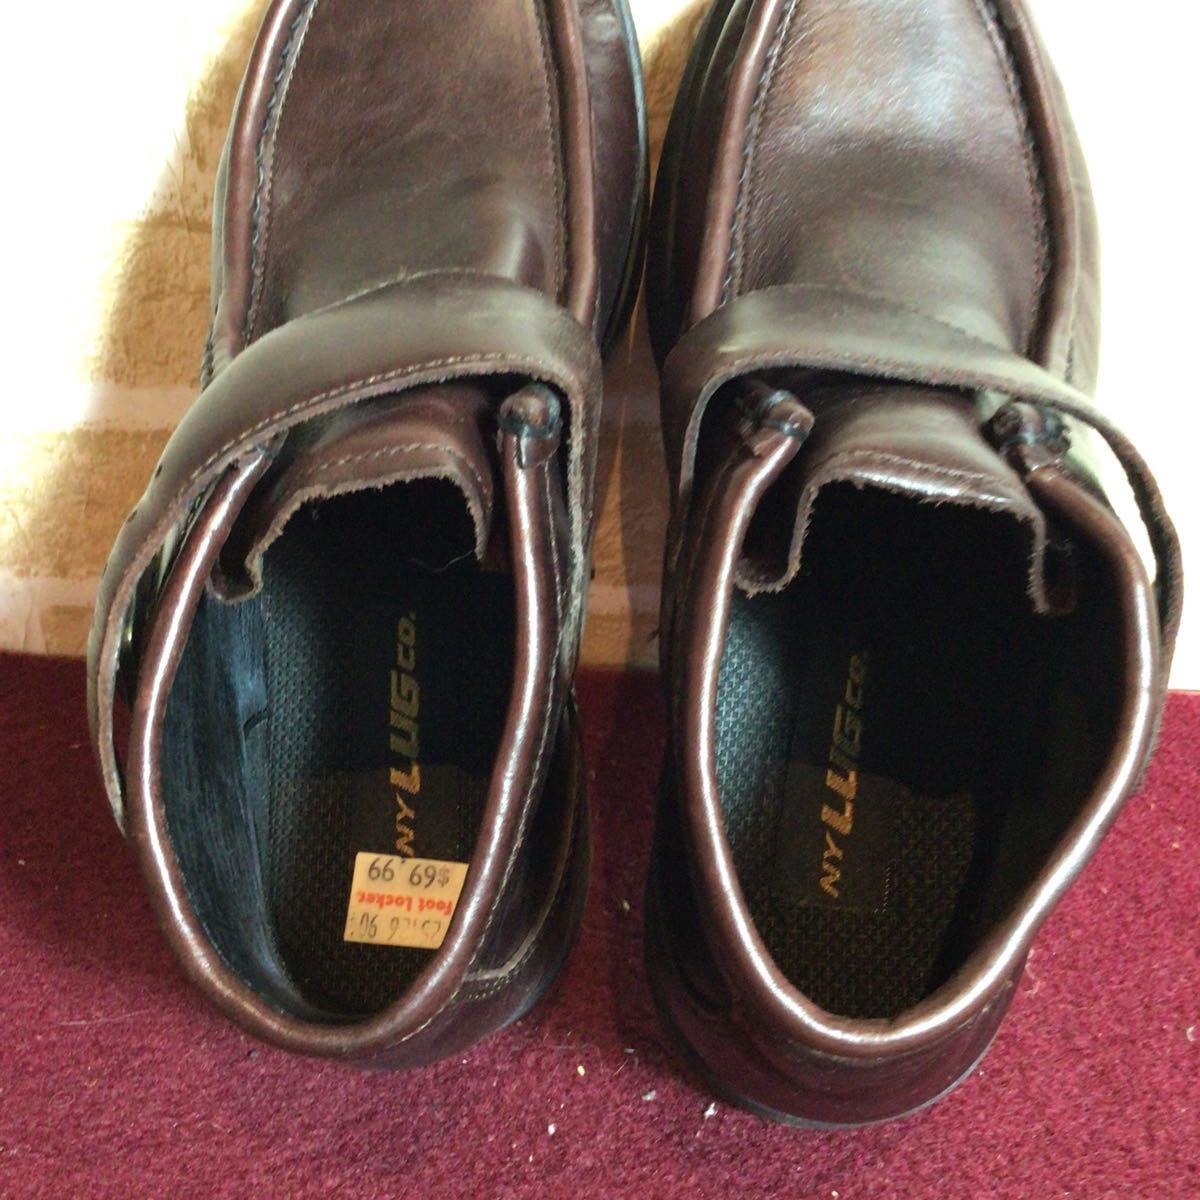 [ selling out! free shipping!]A-164 LUGZ! men's shoes! men's boots! leather boots!USA9!EUR42.5!27.0cm rank! leather! box equipped! new goods! unused! with translation!